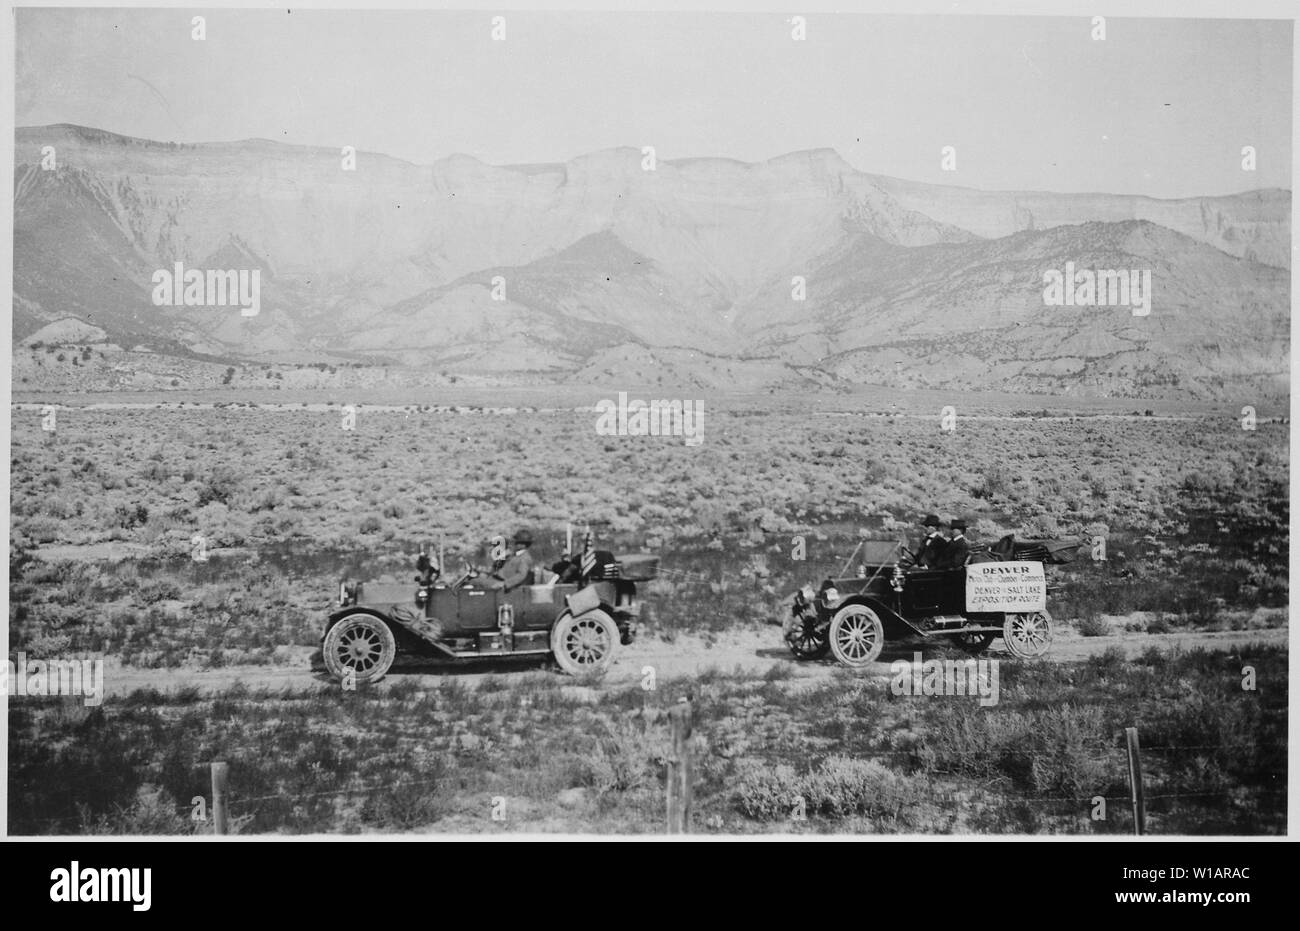 An AAA Good Roads Official on his transcontinental auto trip passes the only road sign in evidence along the dusty, desolate road near Glendive, Mont. By A. L. Westgard, July 1912; Photo by A. L. Westgard, 1912     A. L. Westgard  (1865–1921)     Alternative names  Anton L. Westgard  Description Norwegian-American photographer  Date of birth/death  1865 3 April 1921  Location of birth/death  Norway United States of America  Work location  Western United States  Authority control  : Q3595056    creator QS:P170,Q3595056 Stock Photo